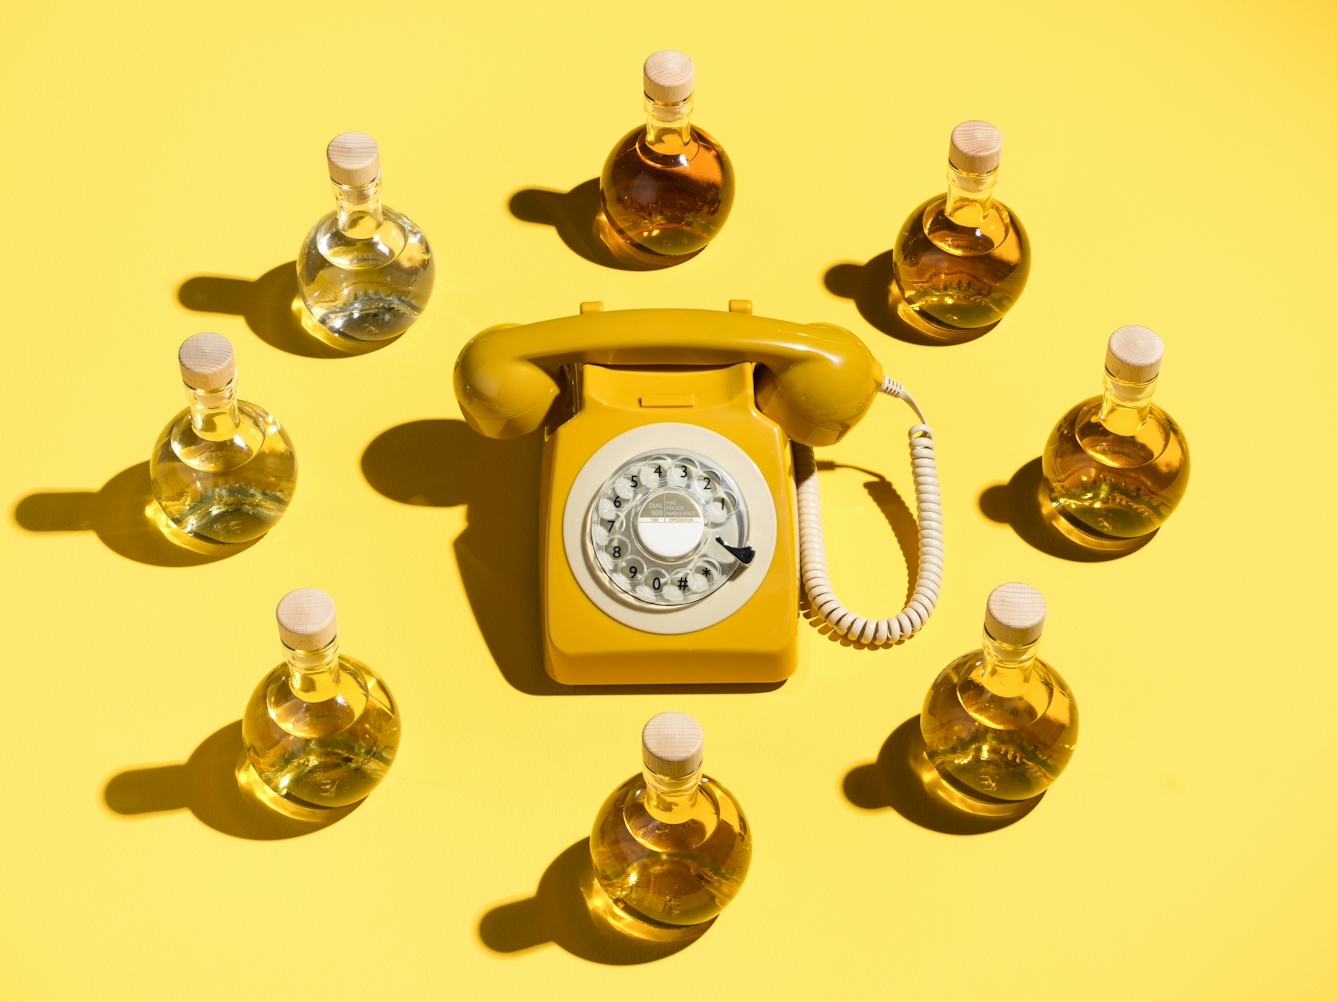 Photograph of a yellow rotary dial telephone surrounded in a circle by 8 specimen bottle containing a yellow liquid which get lighter in hue as you travel clockwise around the circle. The whole scene has been photographed against a bright solid yellow background.